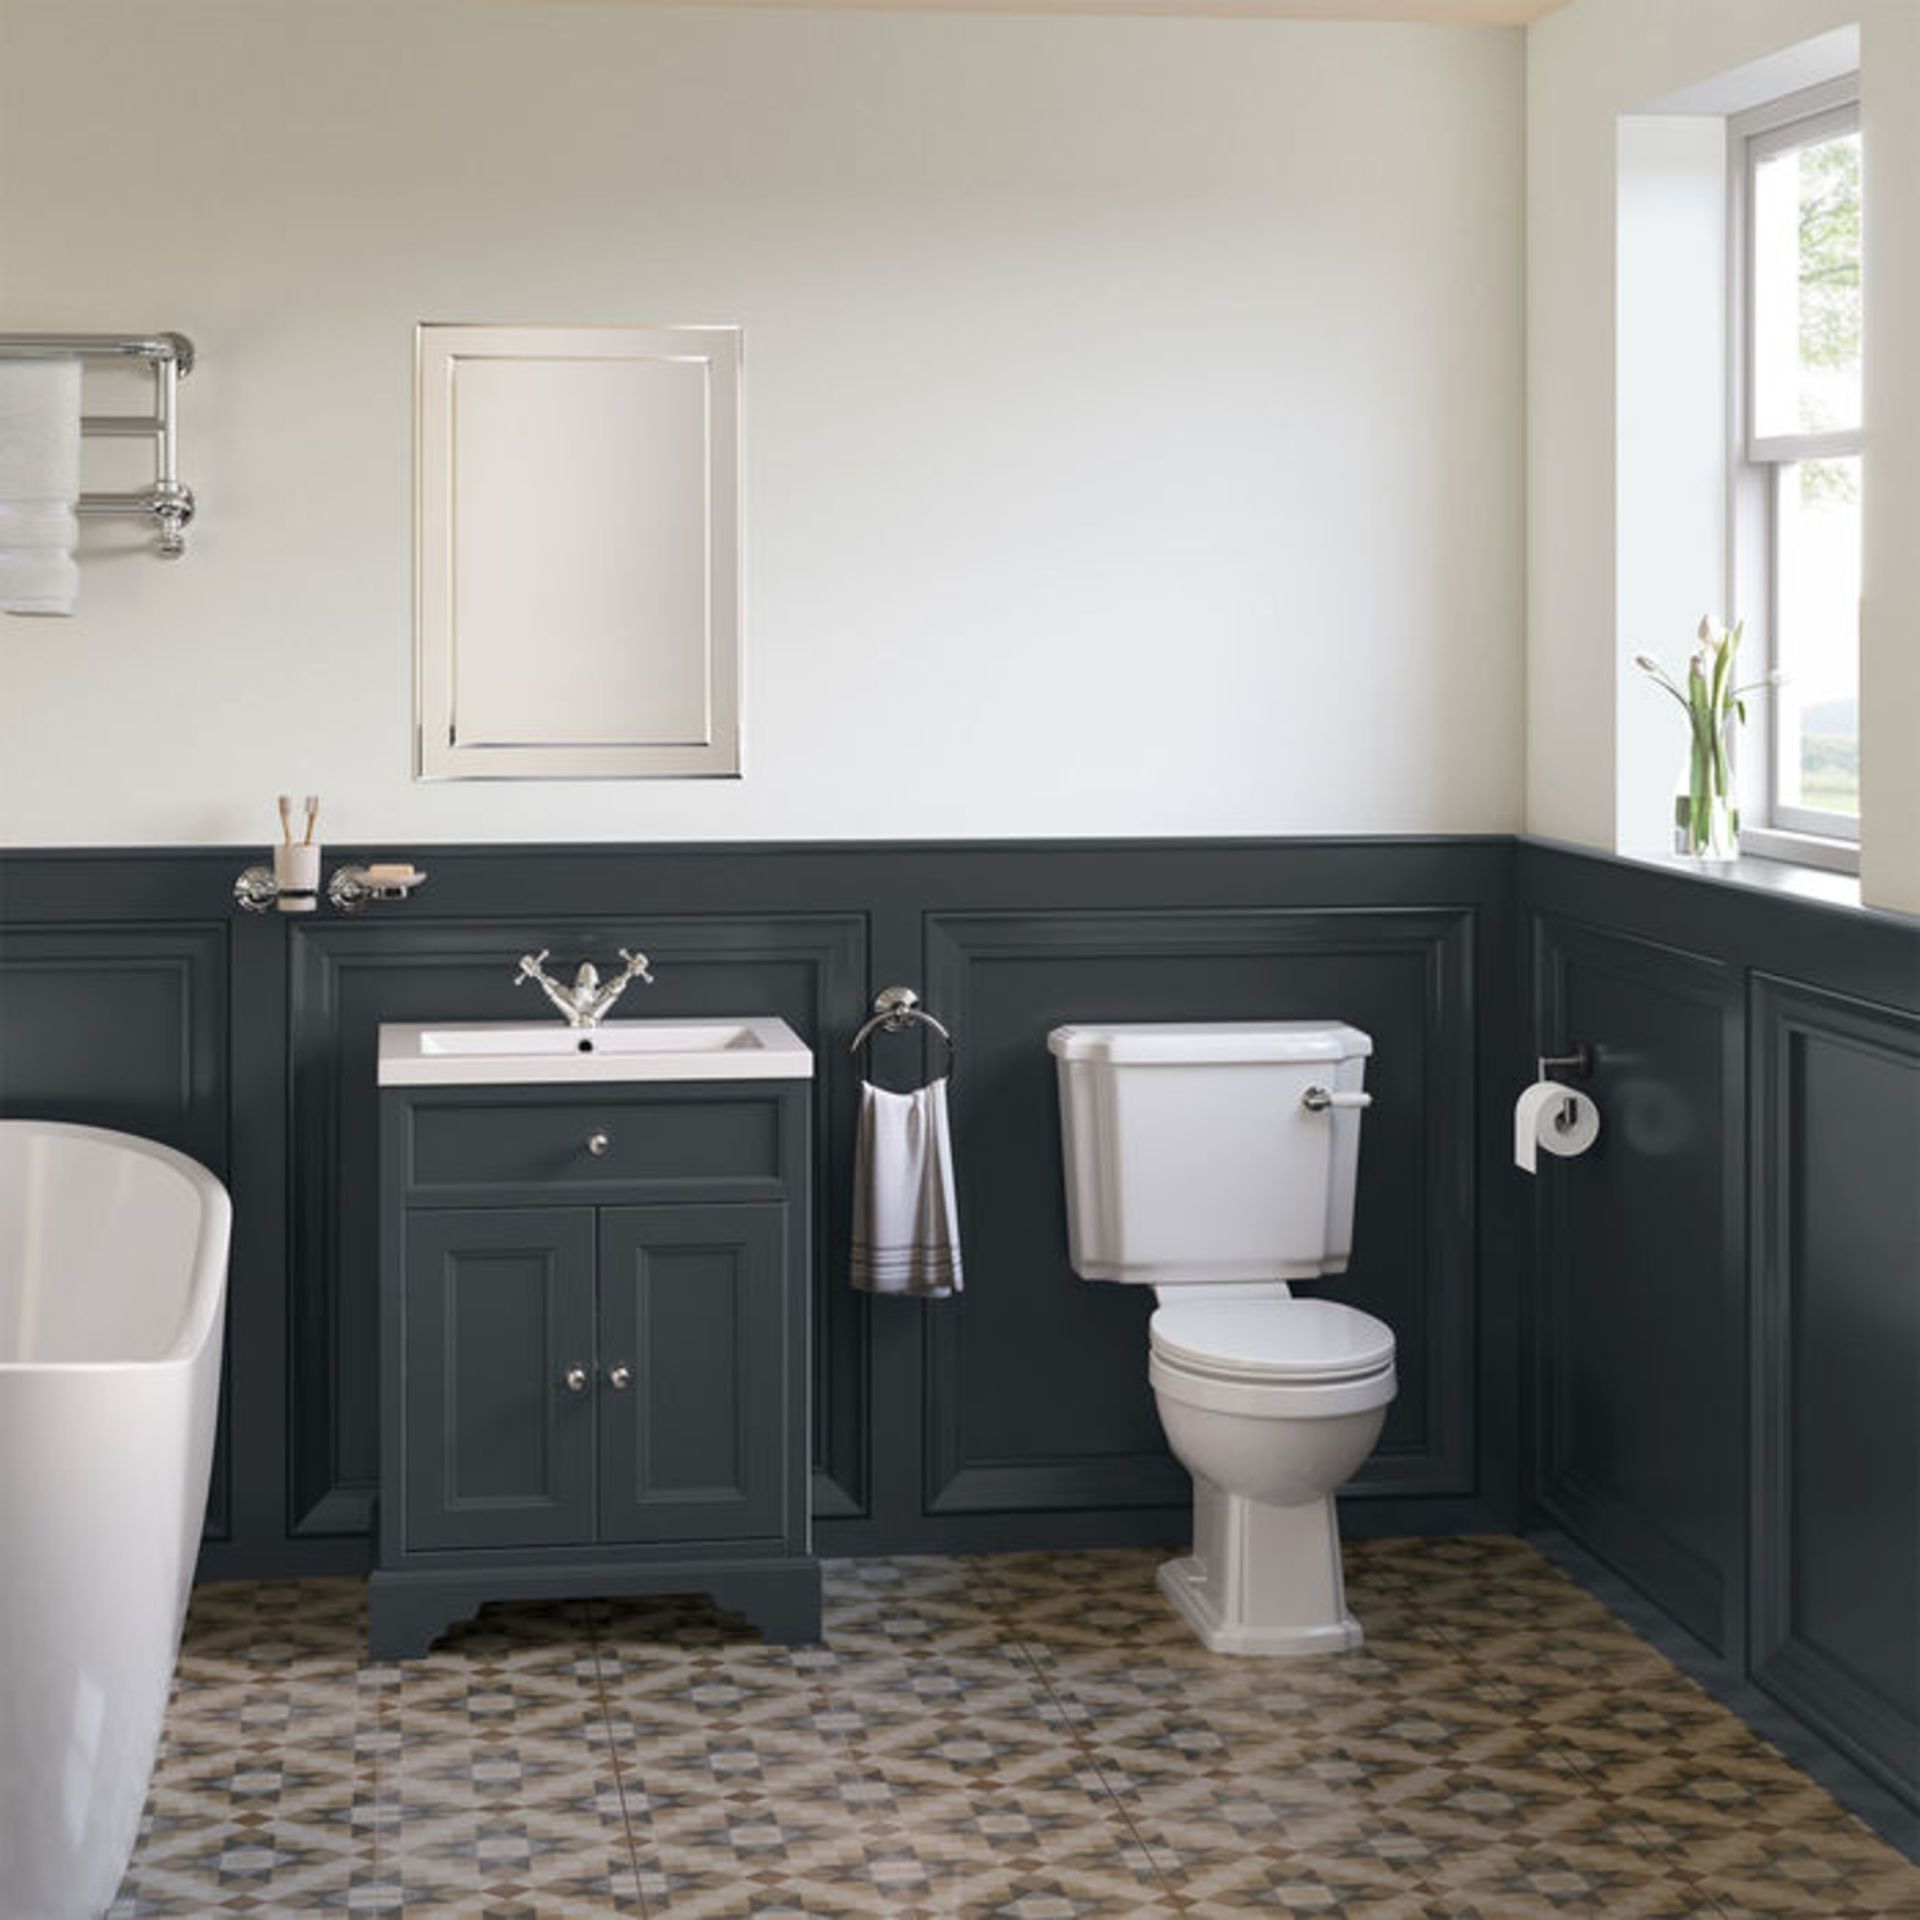 NEW & BOXED 600mm Loxley Charcoal Vanity Unit - Floor Standing. RRP £1,074.99.MF9002.Stunning - Image 3 of 3